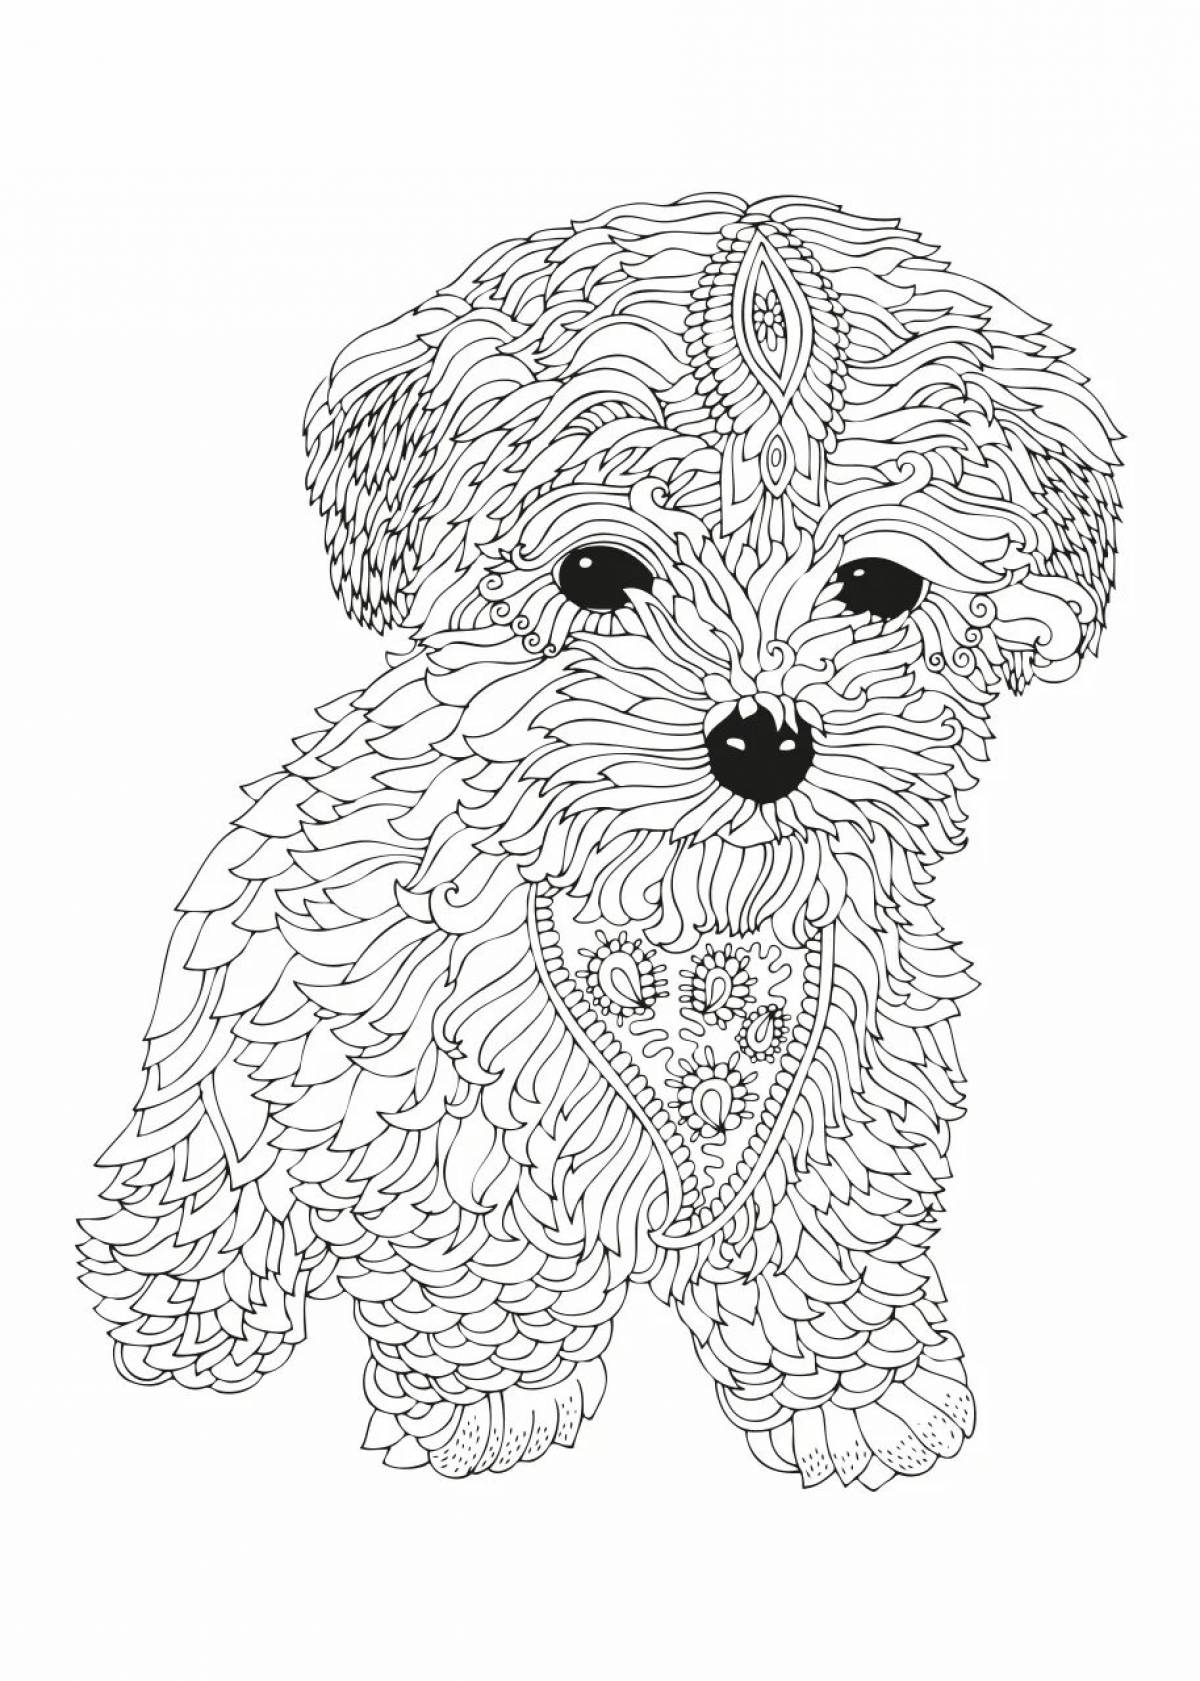 Hypnotic doggy antistress coloring book